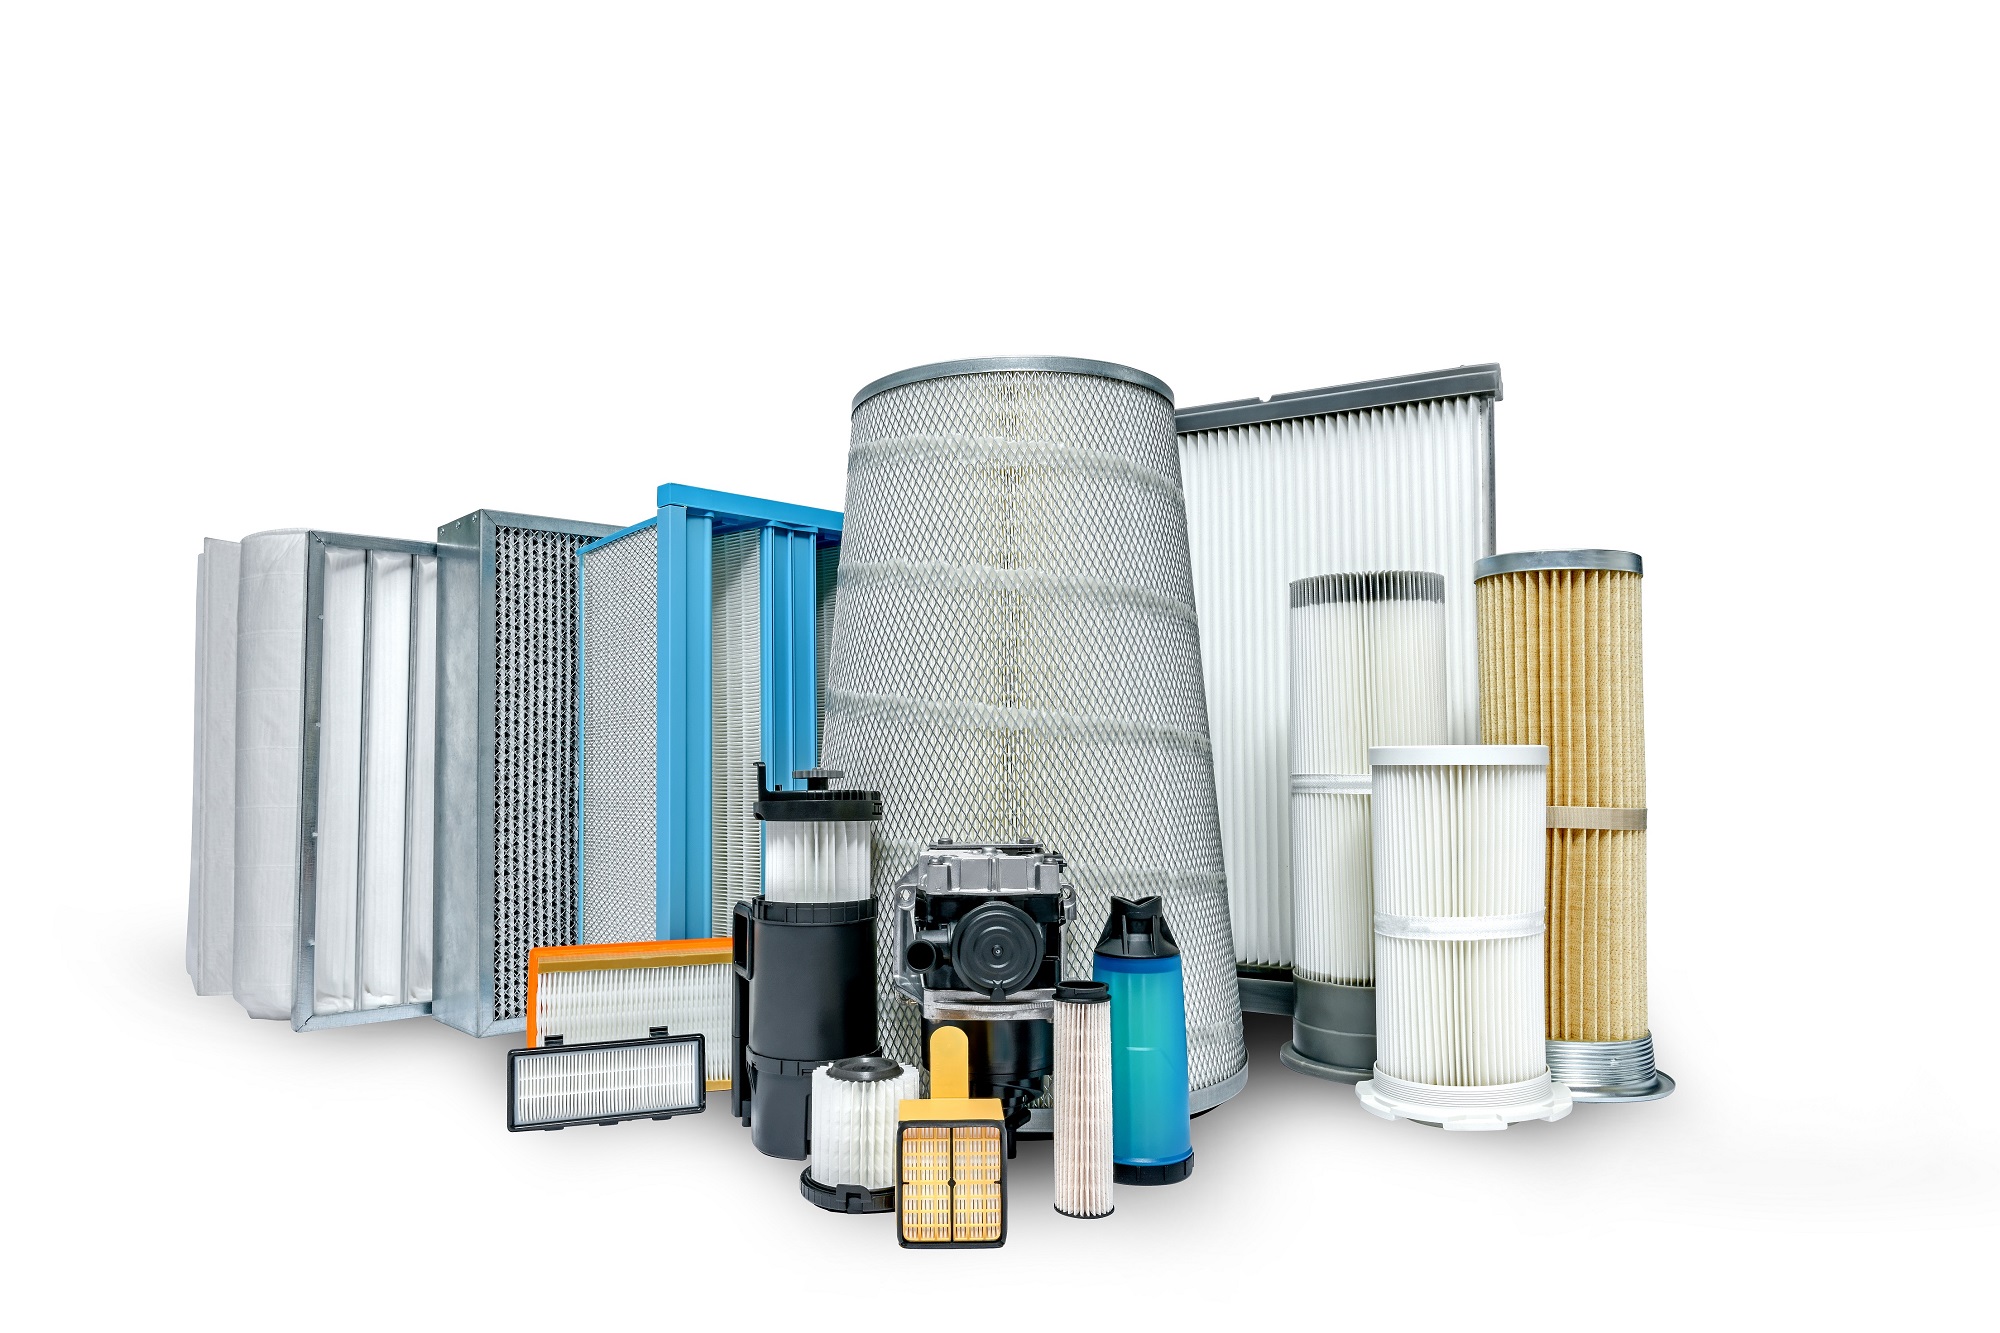 Hengst has increased its portfolio of products following its acquisition of Nordic Air Filtration and Delbag.